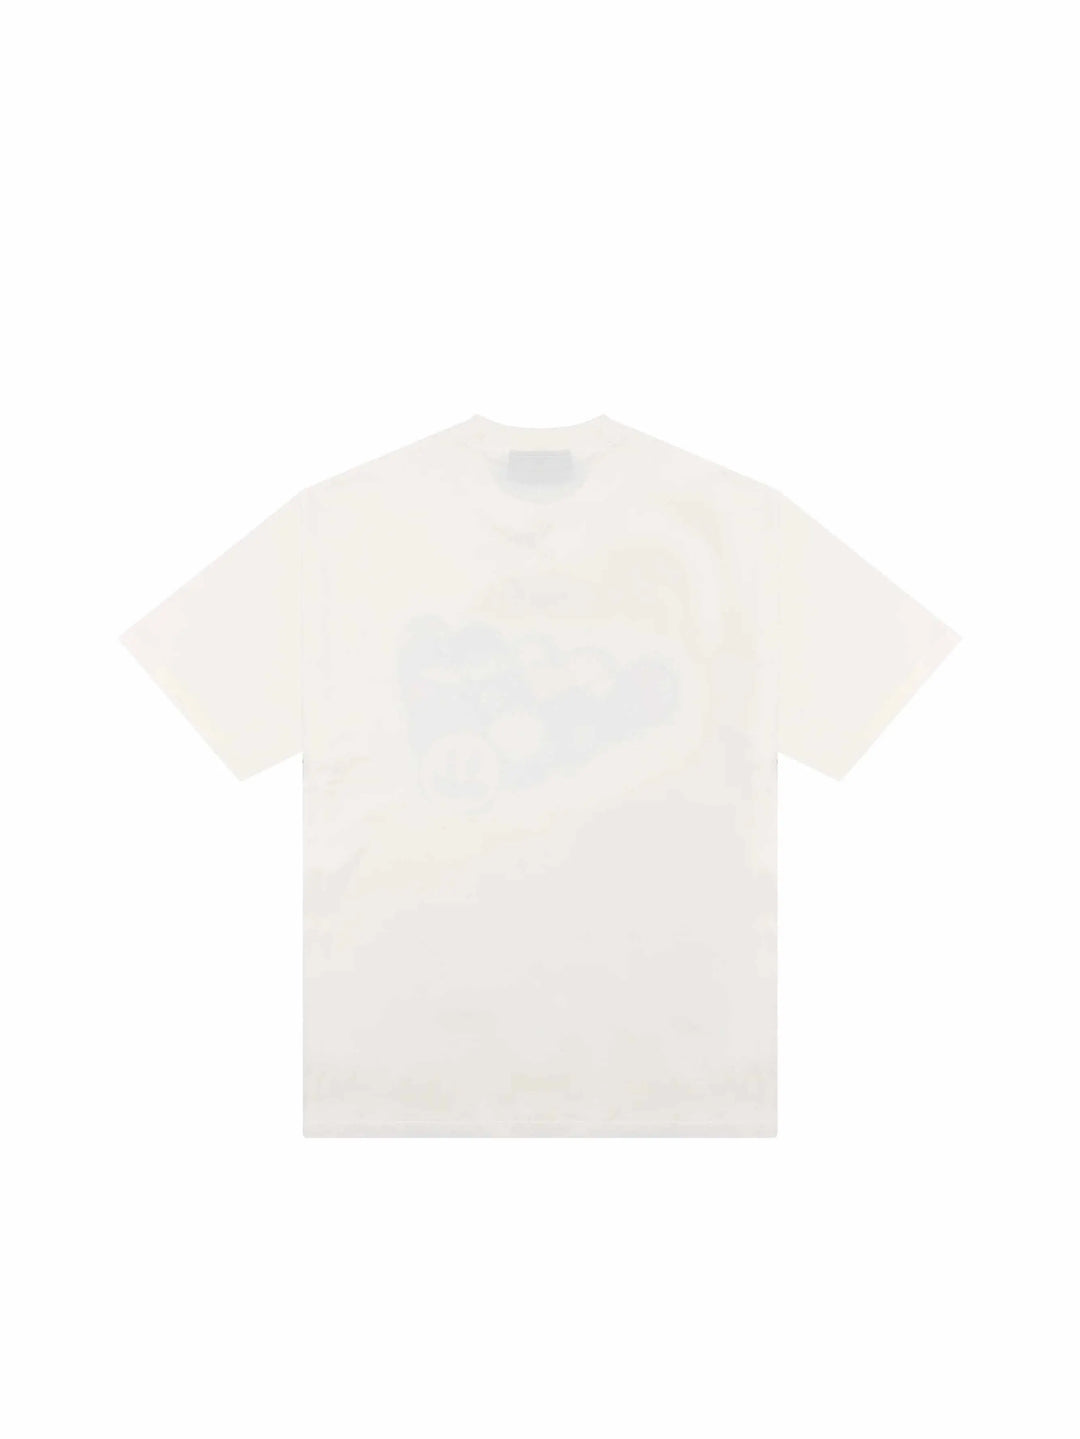 Drew House Pool Hall SS Tee Off White in Auckland, New Zealand - Shop name